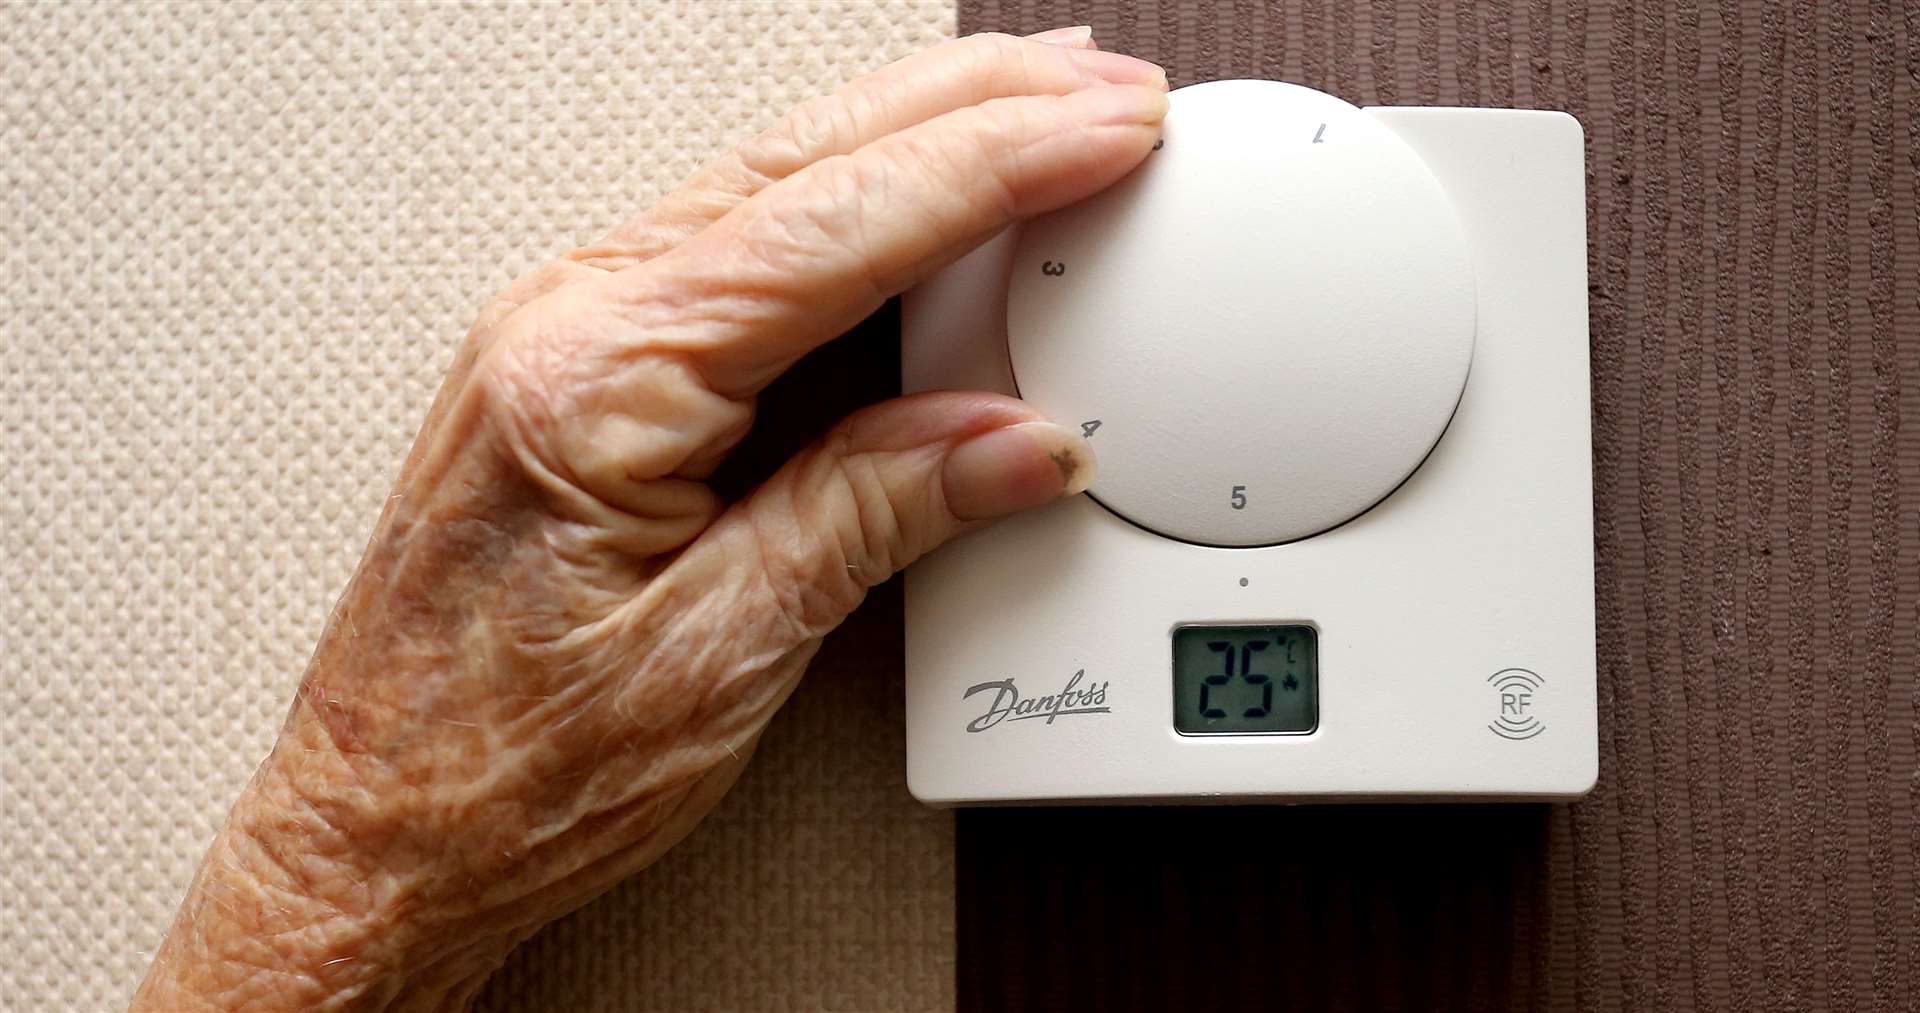 There are concerns people will struggle to afford to heat their homes this winter because of rising prices